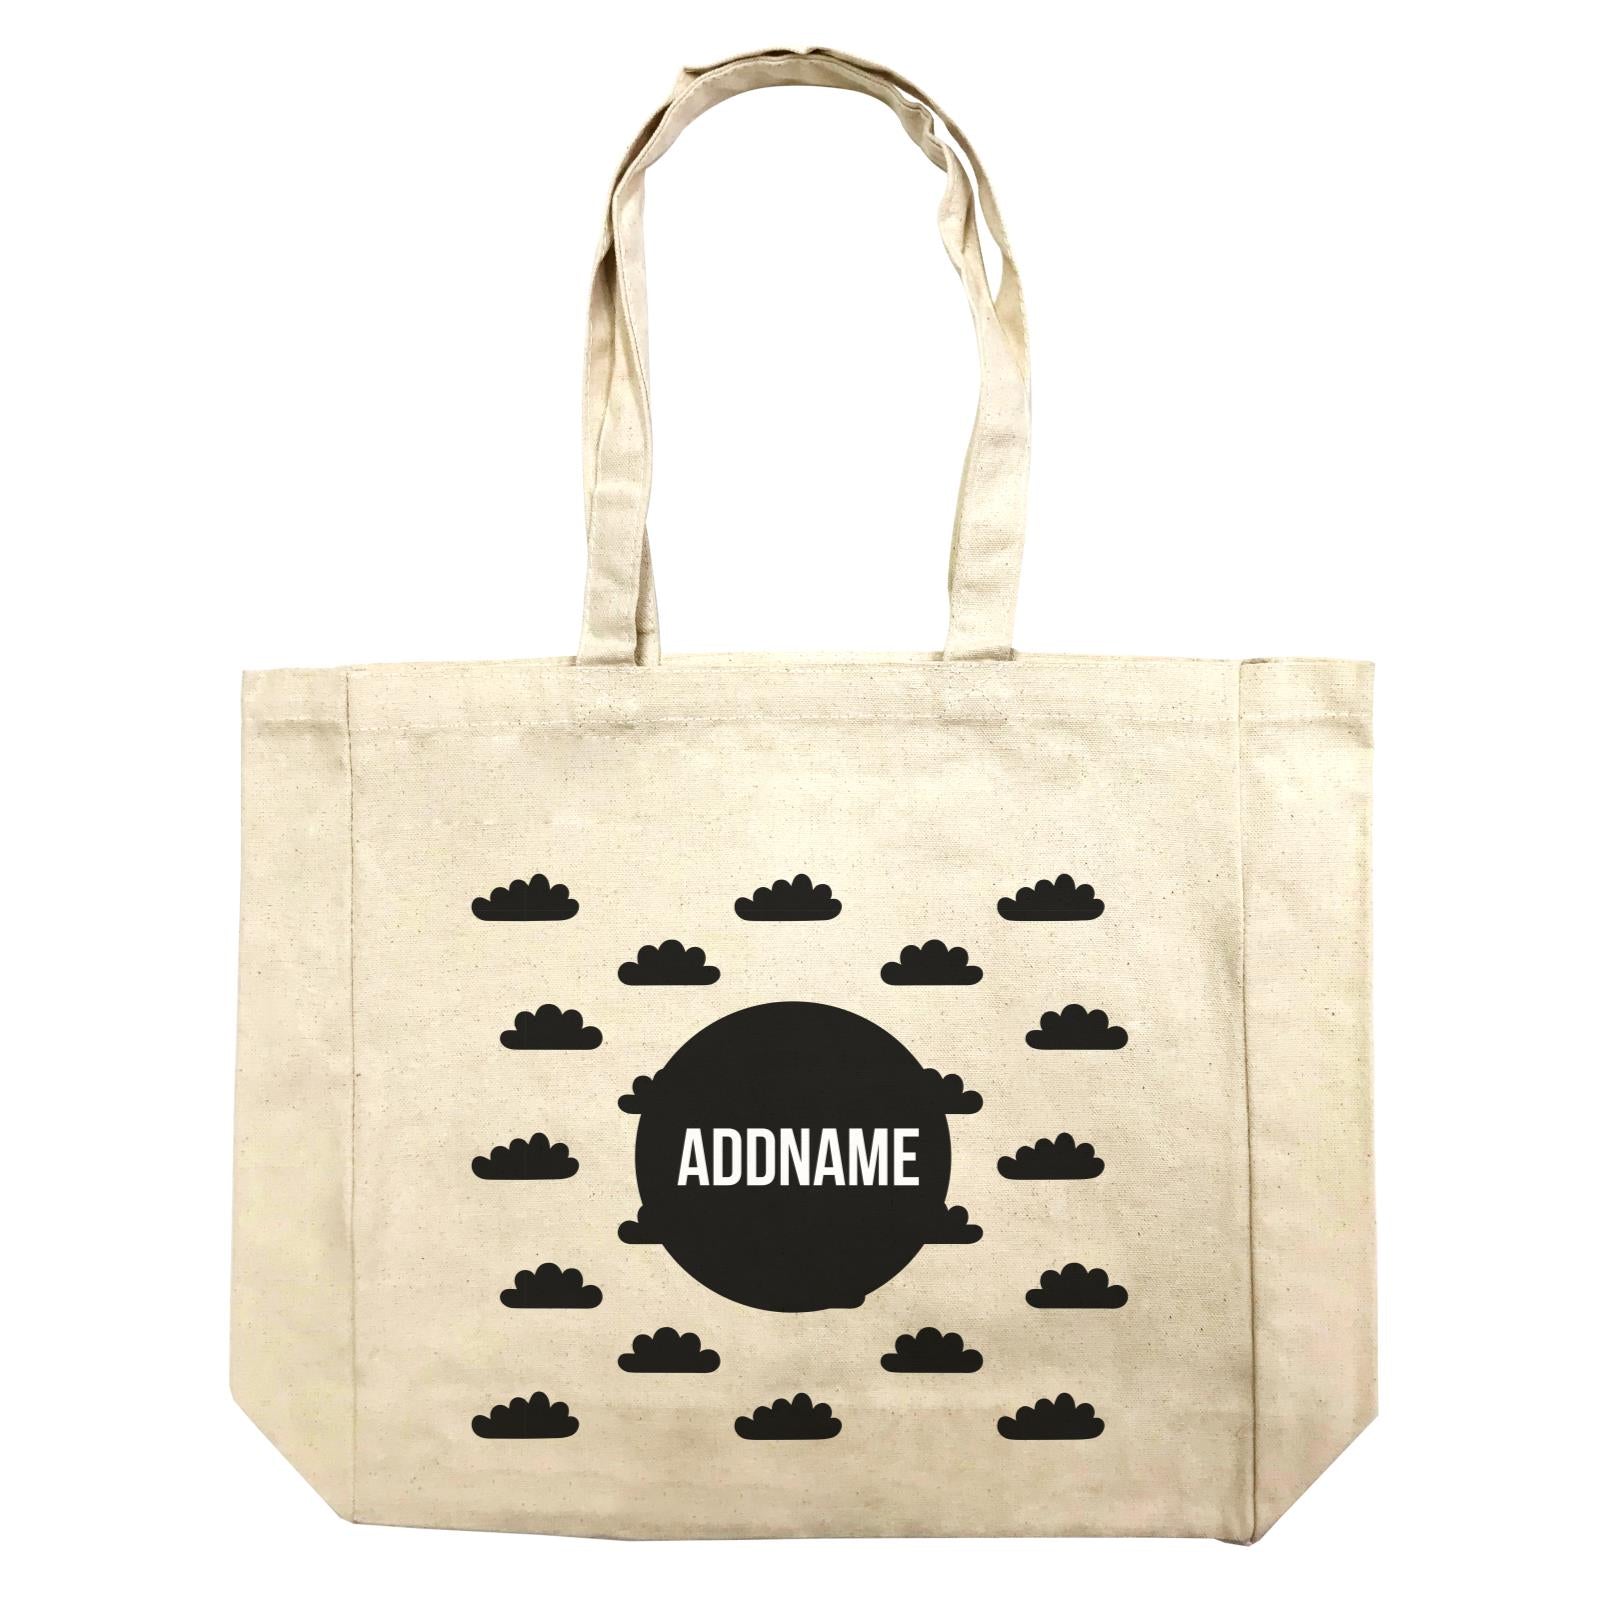 Monochrome Black Circle with Clouds Addname Shopping Bag